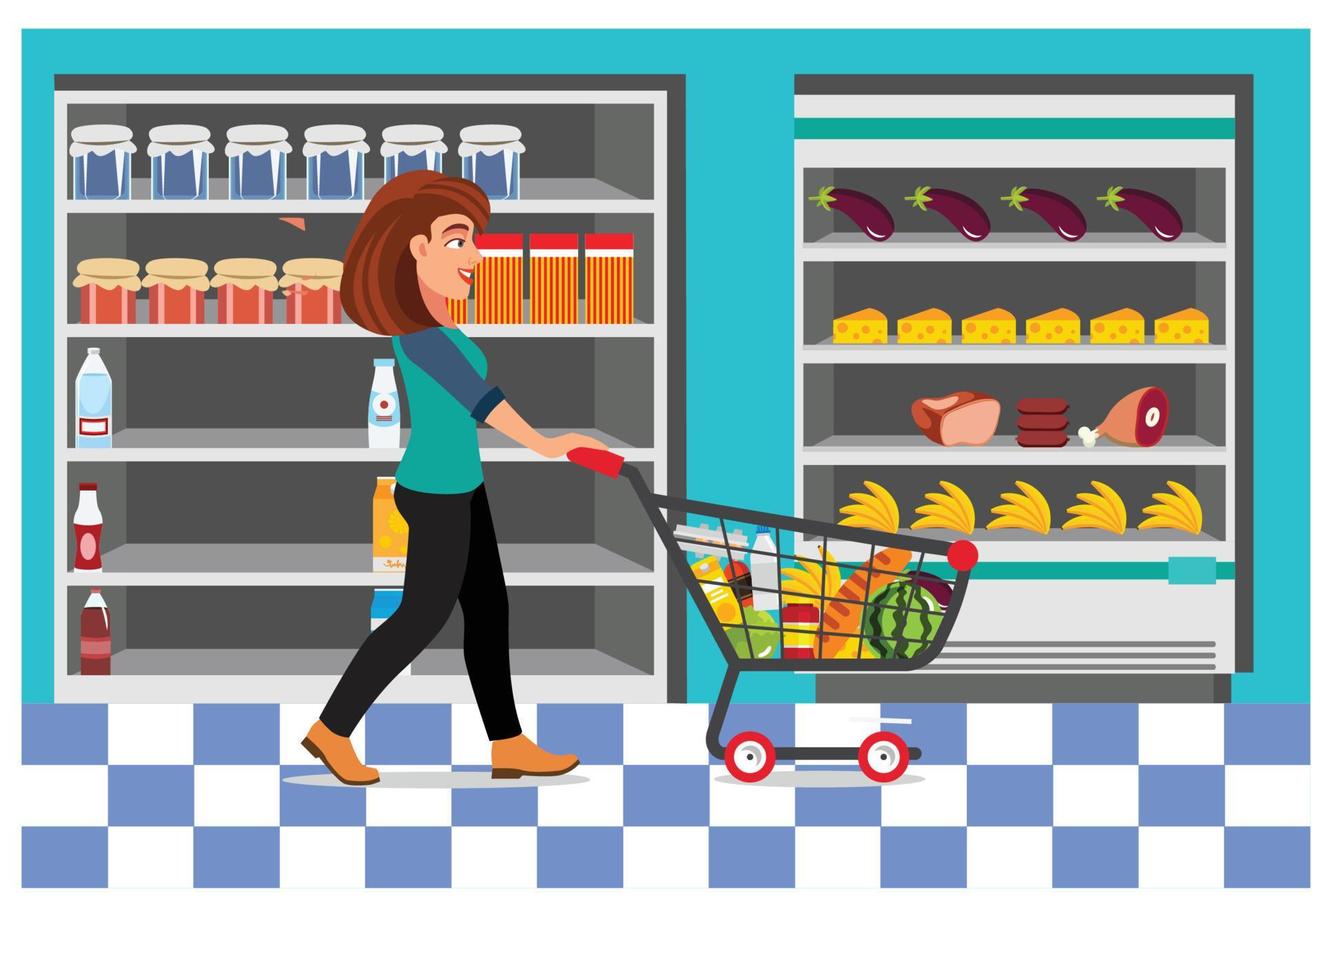 Vector illustration of shopping in minimarket with characters. Illustration Suitable for Diagrams, Infographics, And Other Graphic assets